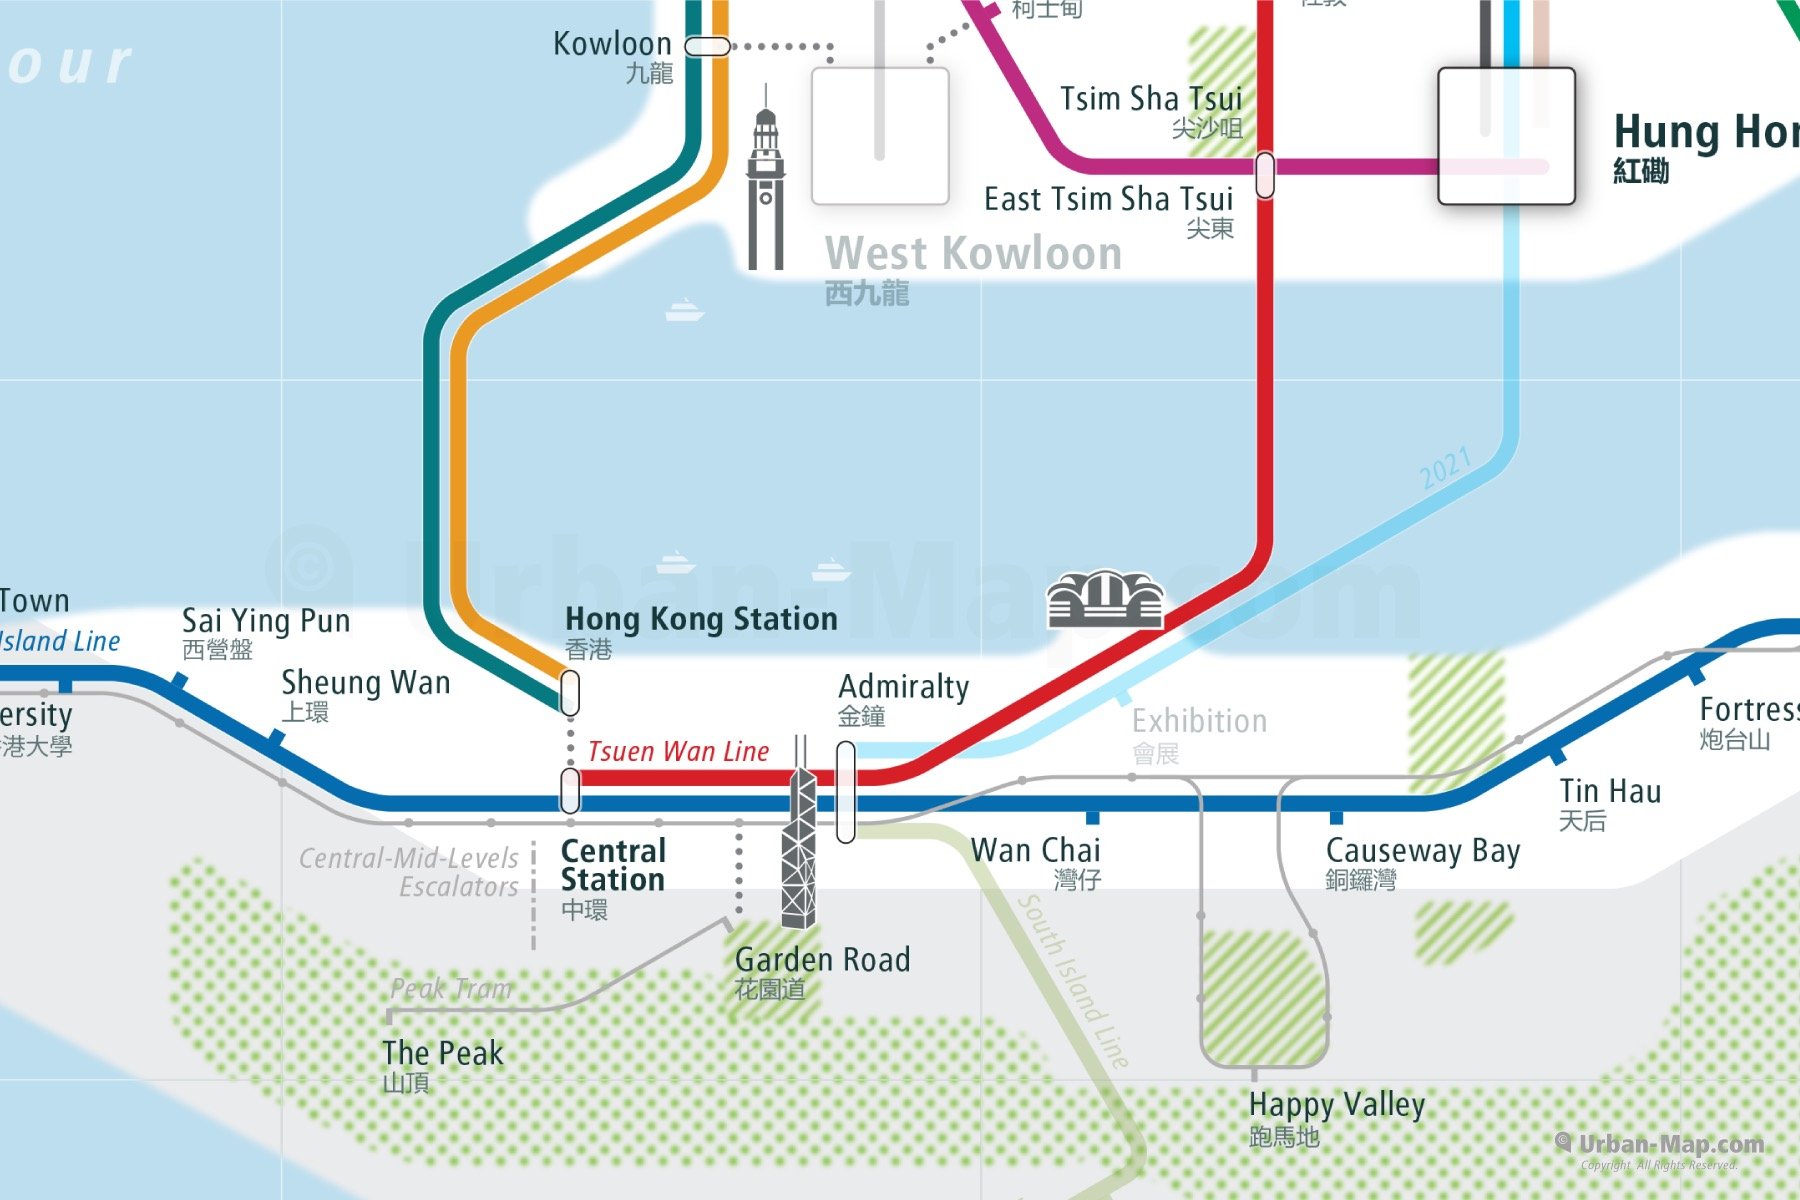 Hong Kong City Rail Map shows the train and public transportation routes of metro - Close-Up